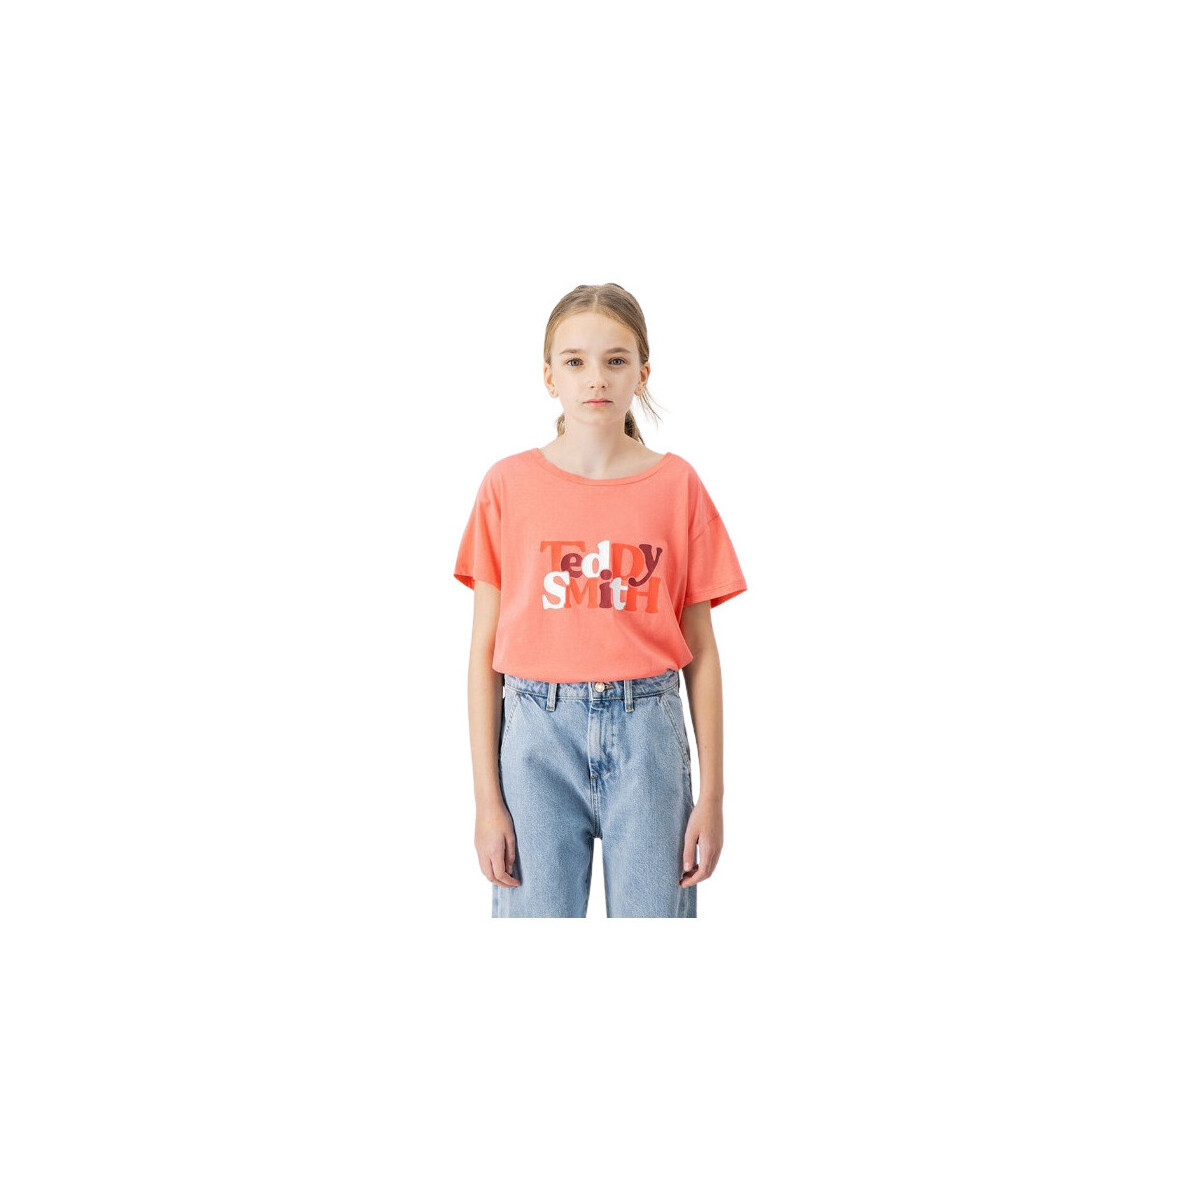 Teddy Smith Multicolore TEE-SHIRT T-YOUPY JUNIOR - PINK